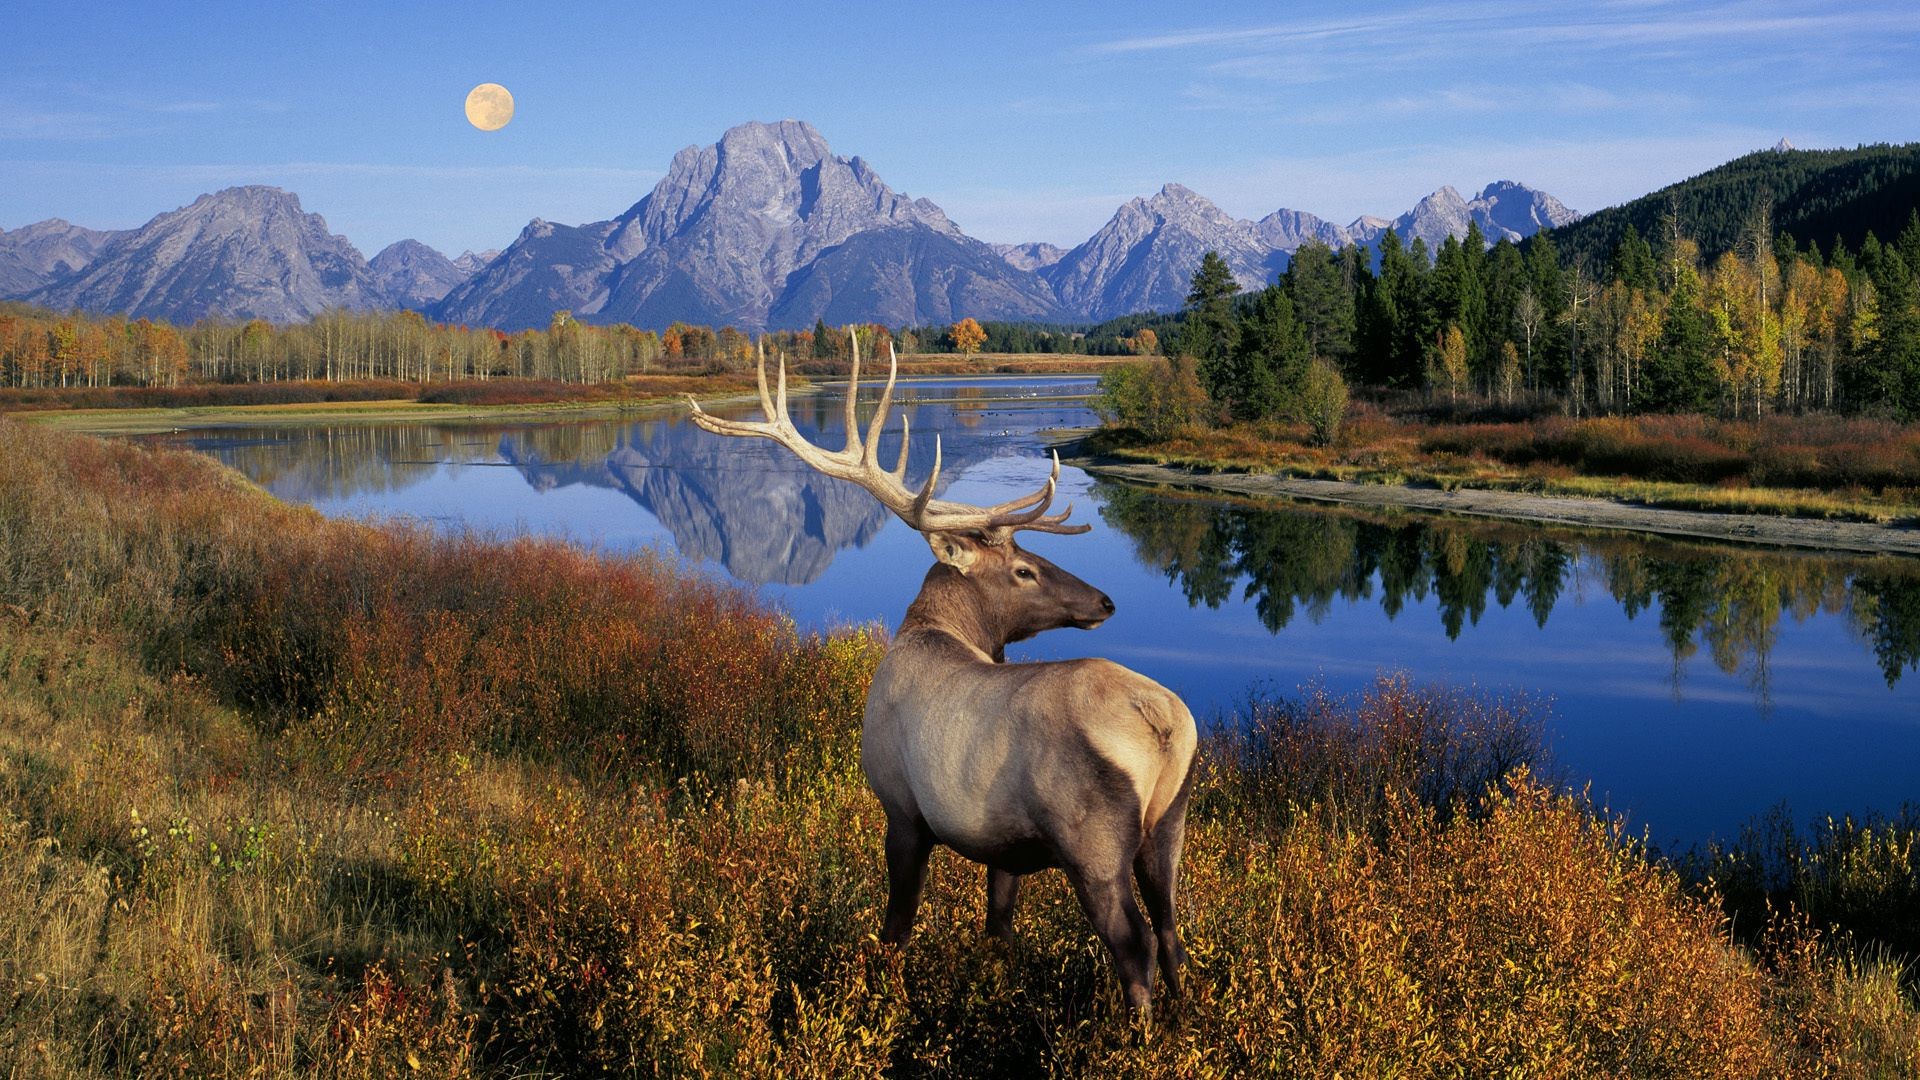 deer moose lake water reflection wood fall nature landscape outdoors wild mountain snow travel